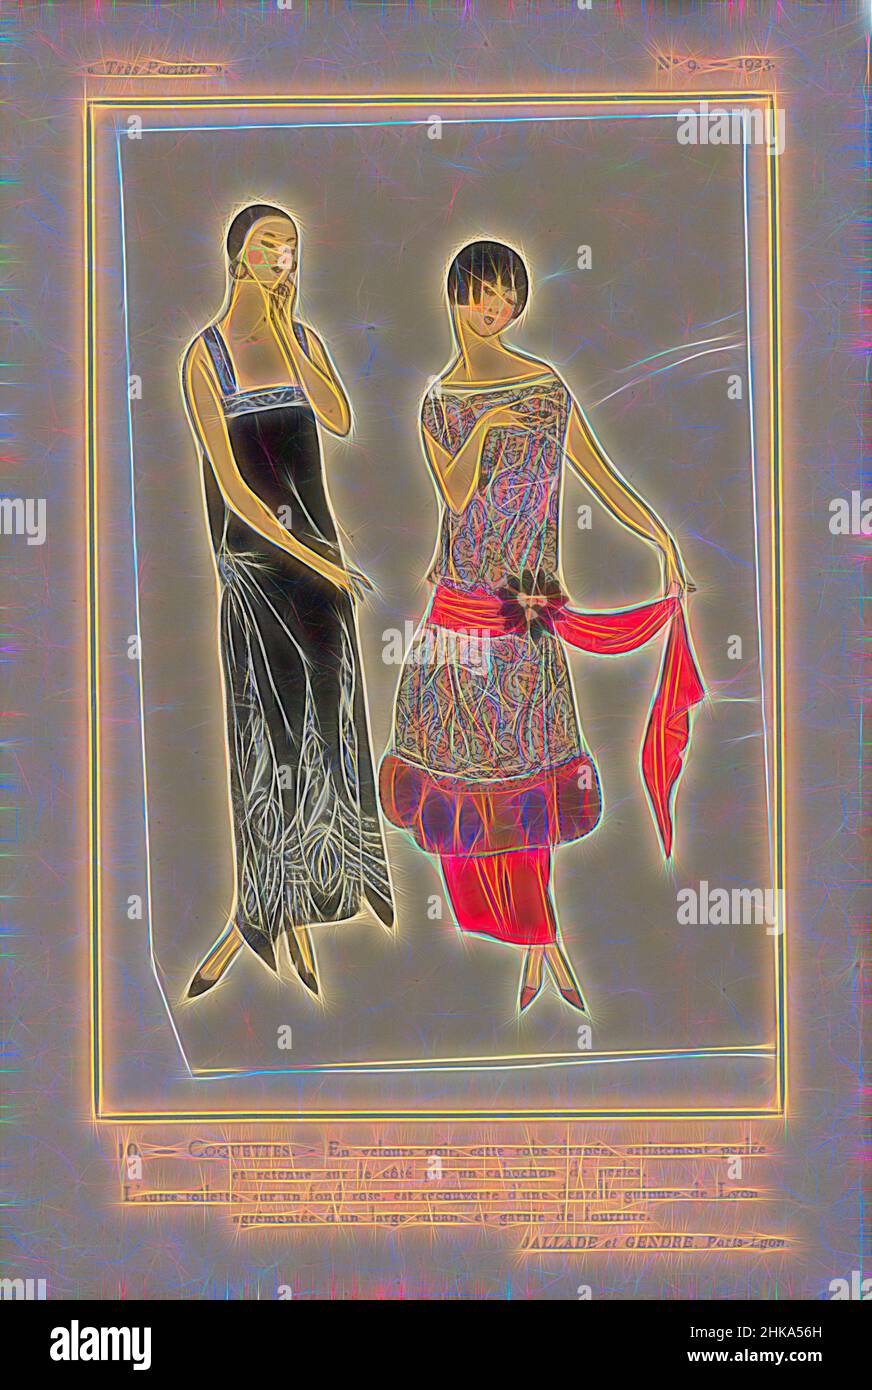 Inspired by Très Parisien, 1923, No 9: 10 - COQUETTES. - En velours noir, cette robe drapée,..., Draped evening dress of black velvet decorated with beads; held up at the side by a 'cabochon de perles'. The other 'toilette', on a pink ground, is overlaid with 'dentelle guipure de Lyon' (lace, Reimagined by Artotop. Classic art reinvented with a modern twist. Design of warm cheerful glowing of brightness and light ray radiance. Photography inspired by surrealism and futurism, embracing dynamic energy of modern technology, movement, speed and revolutionize culture Stock Photo